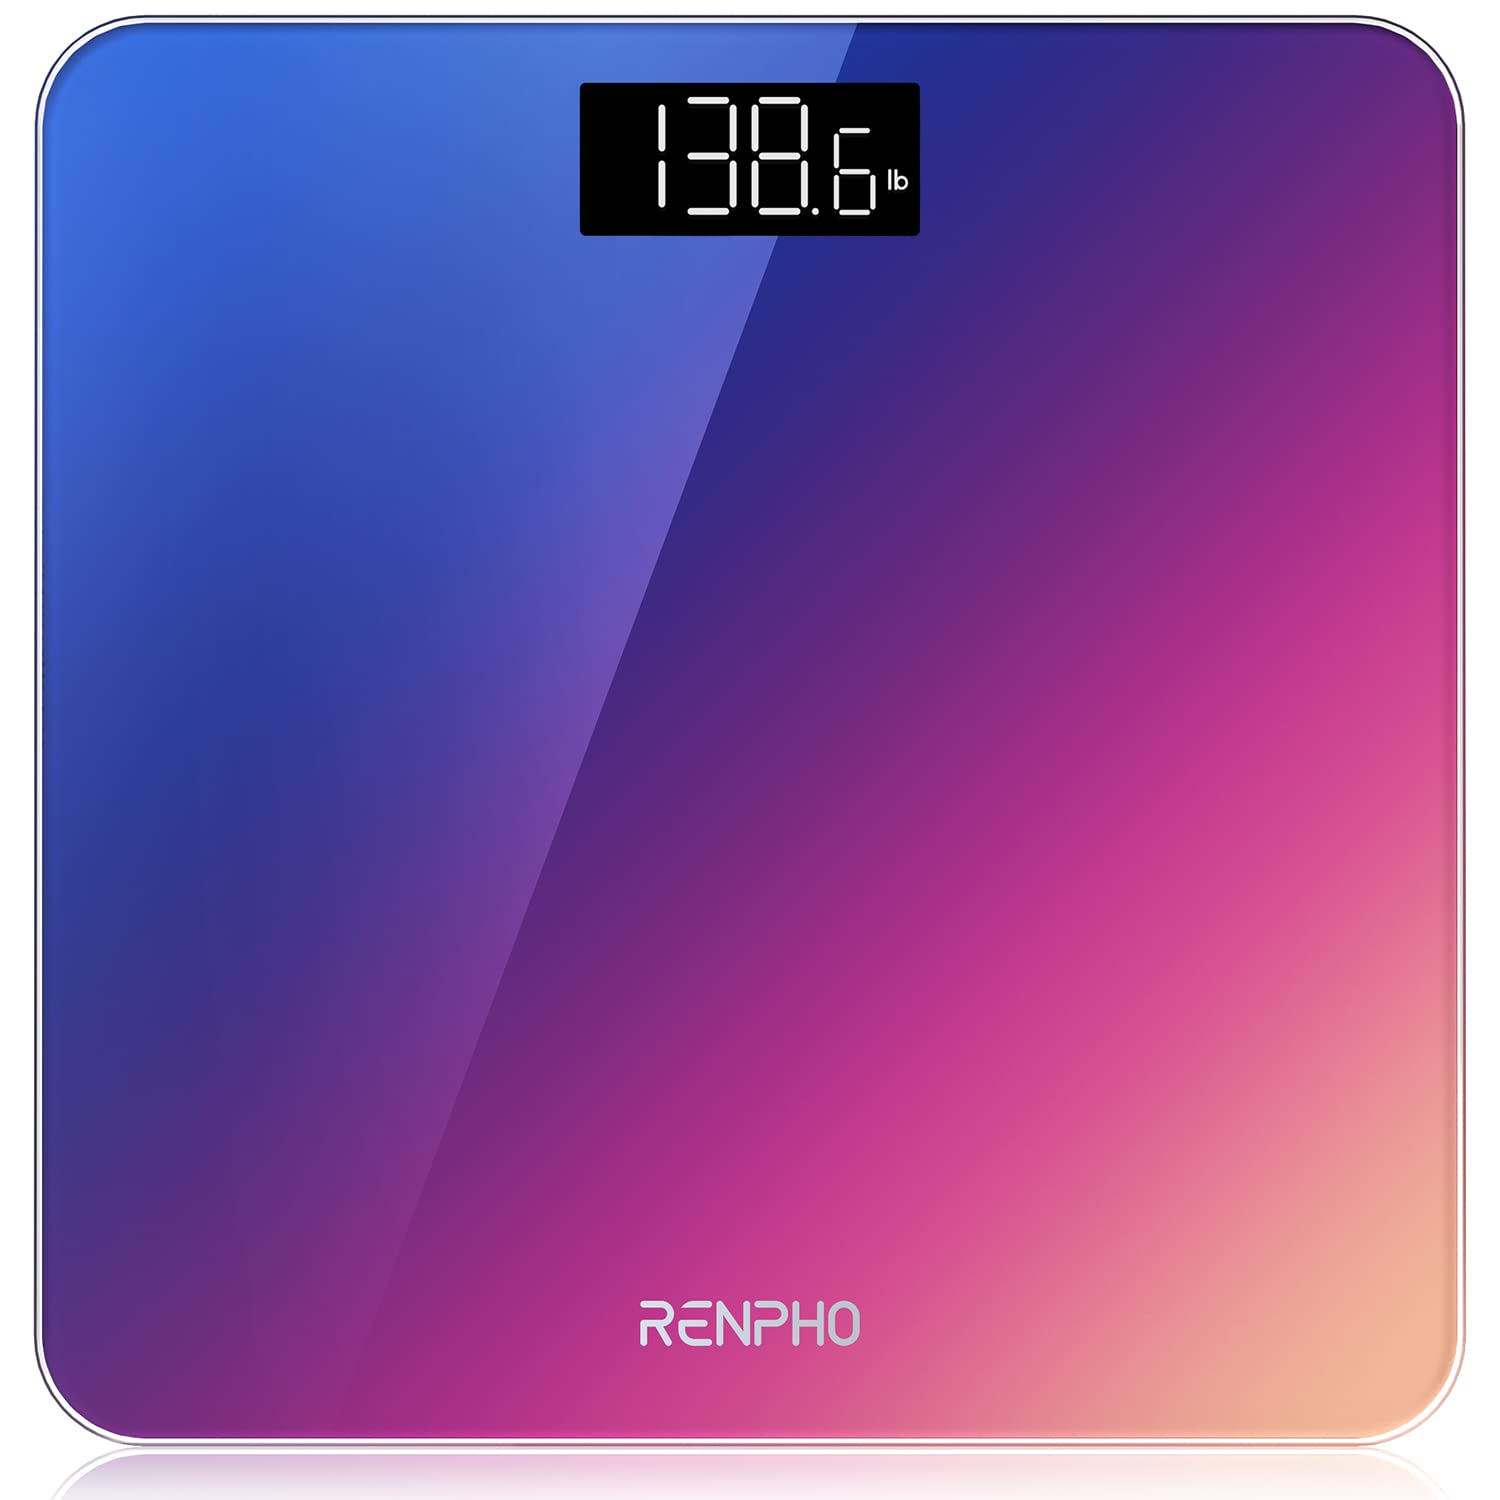 RENPHO Digital Body Weight Scale, Highly Accurate Scale for Weight, LED  Display Weight Measurements, Round Corner Design, Anti-Slip, 400 lb 